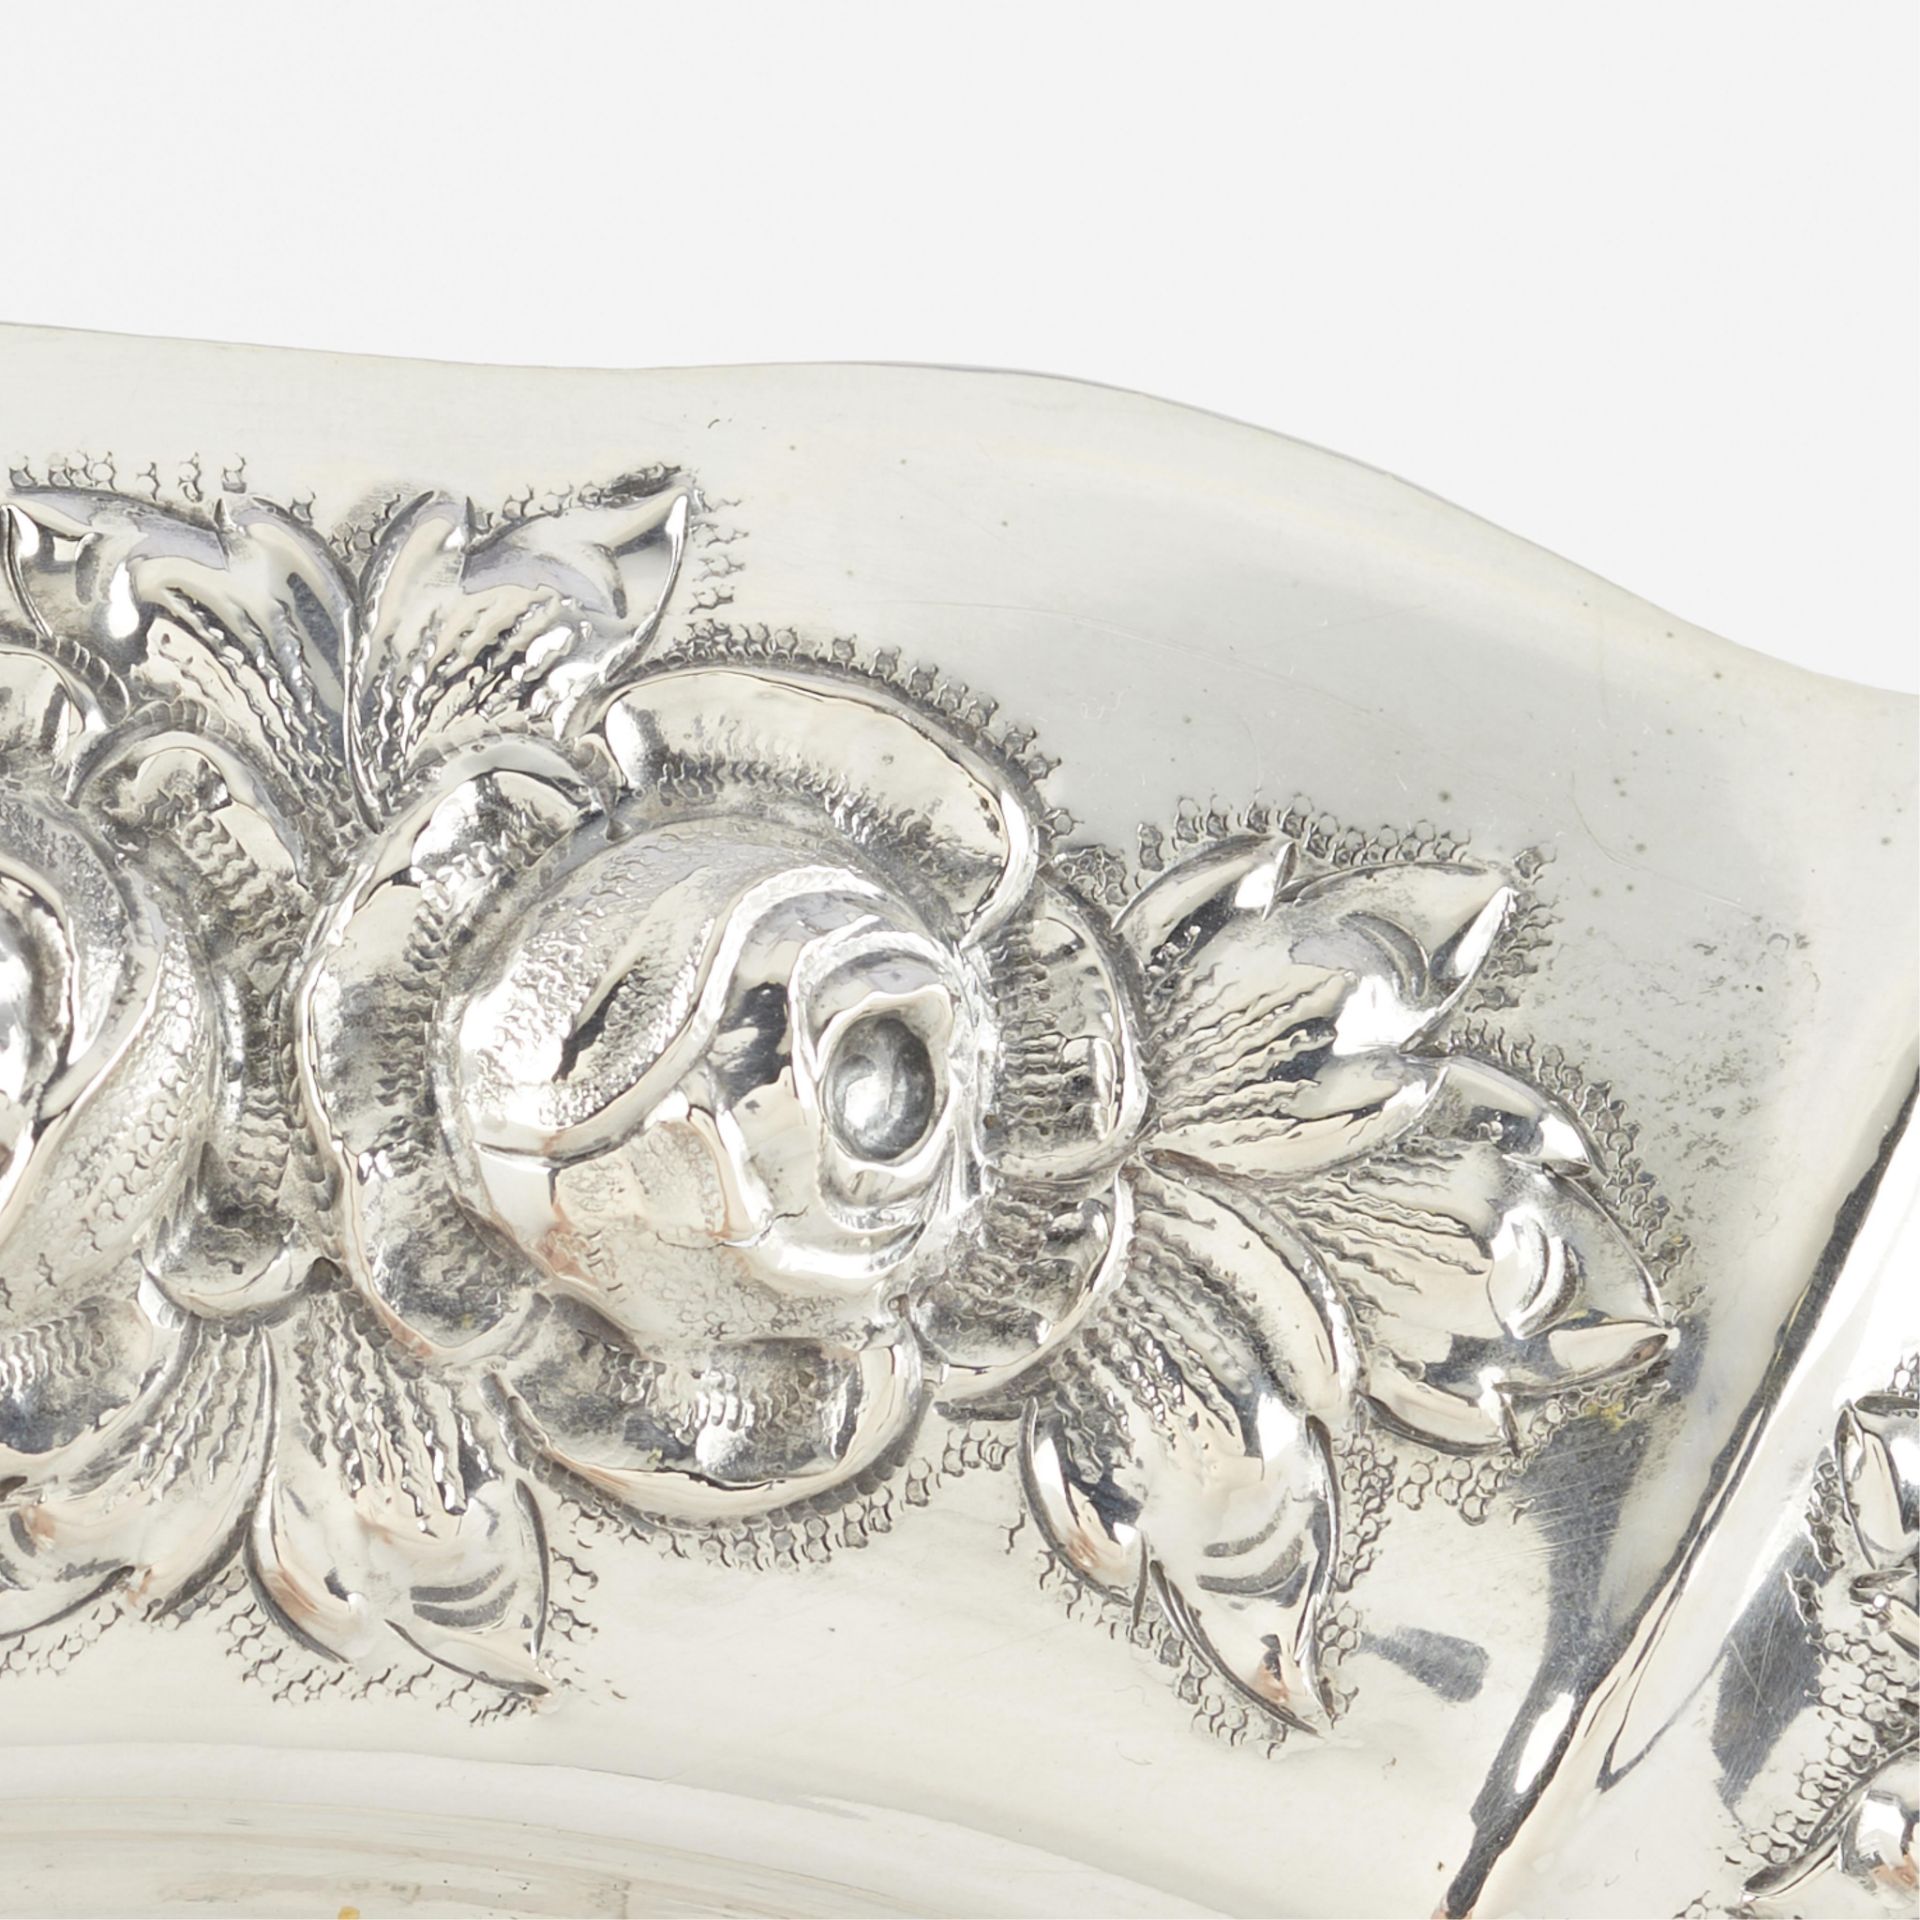 800 Silver Plate with Repousse Roses - Image 3 of 6